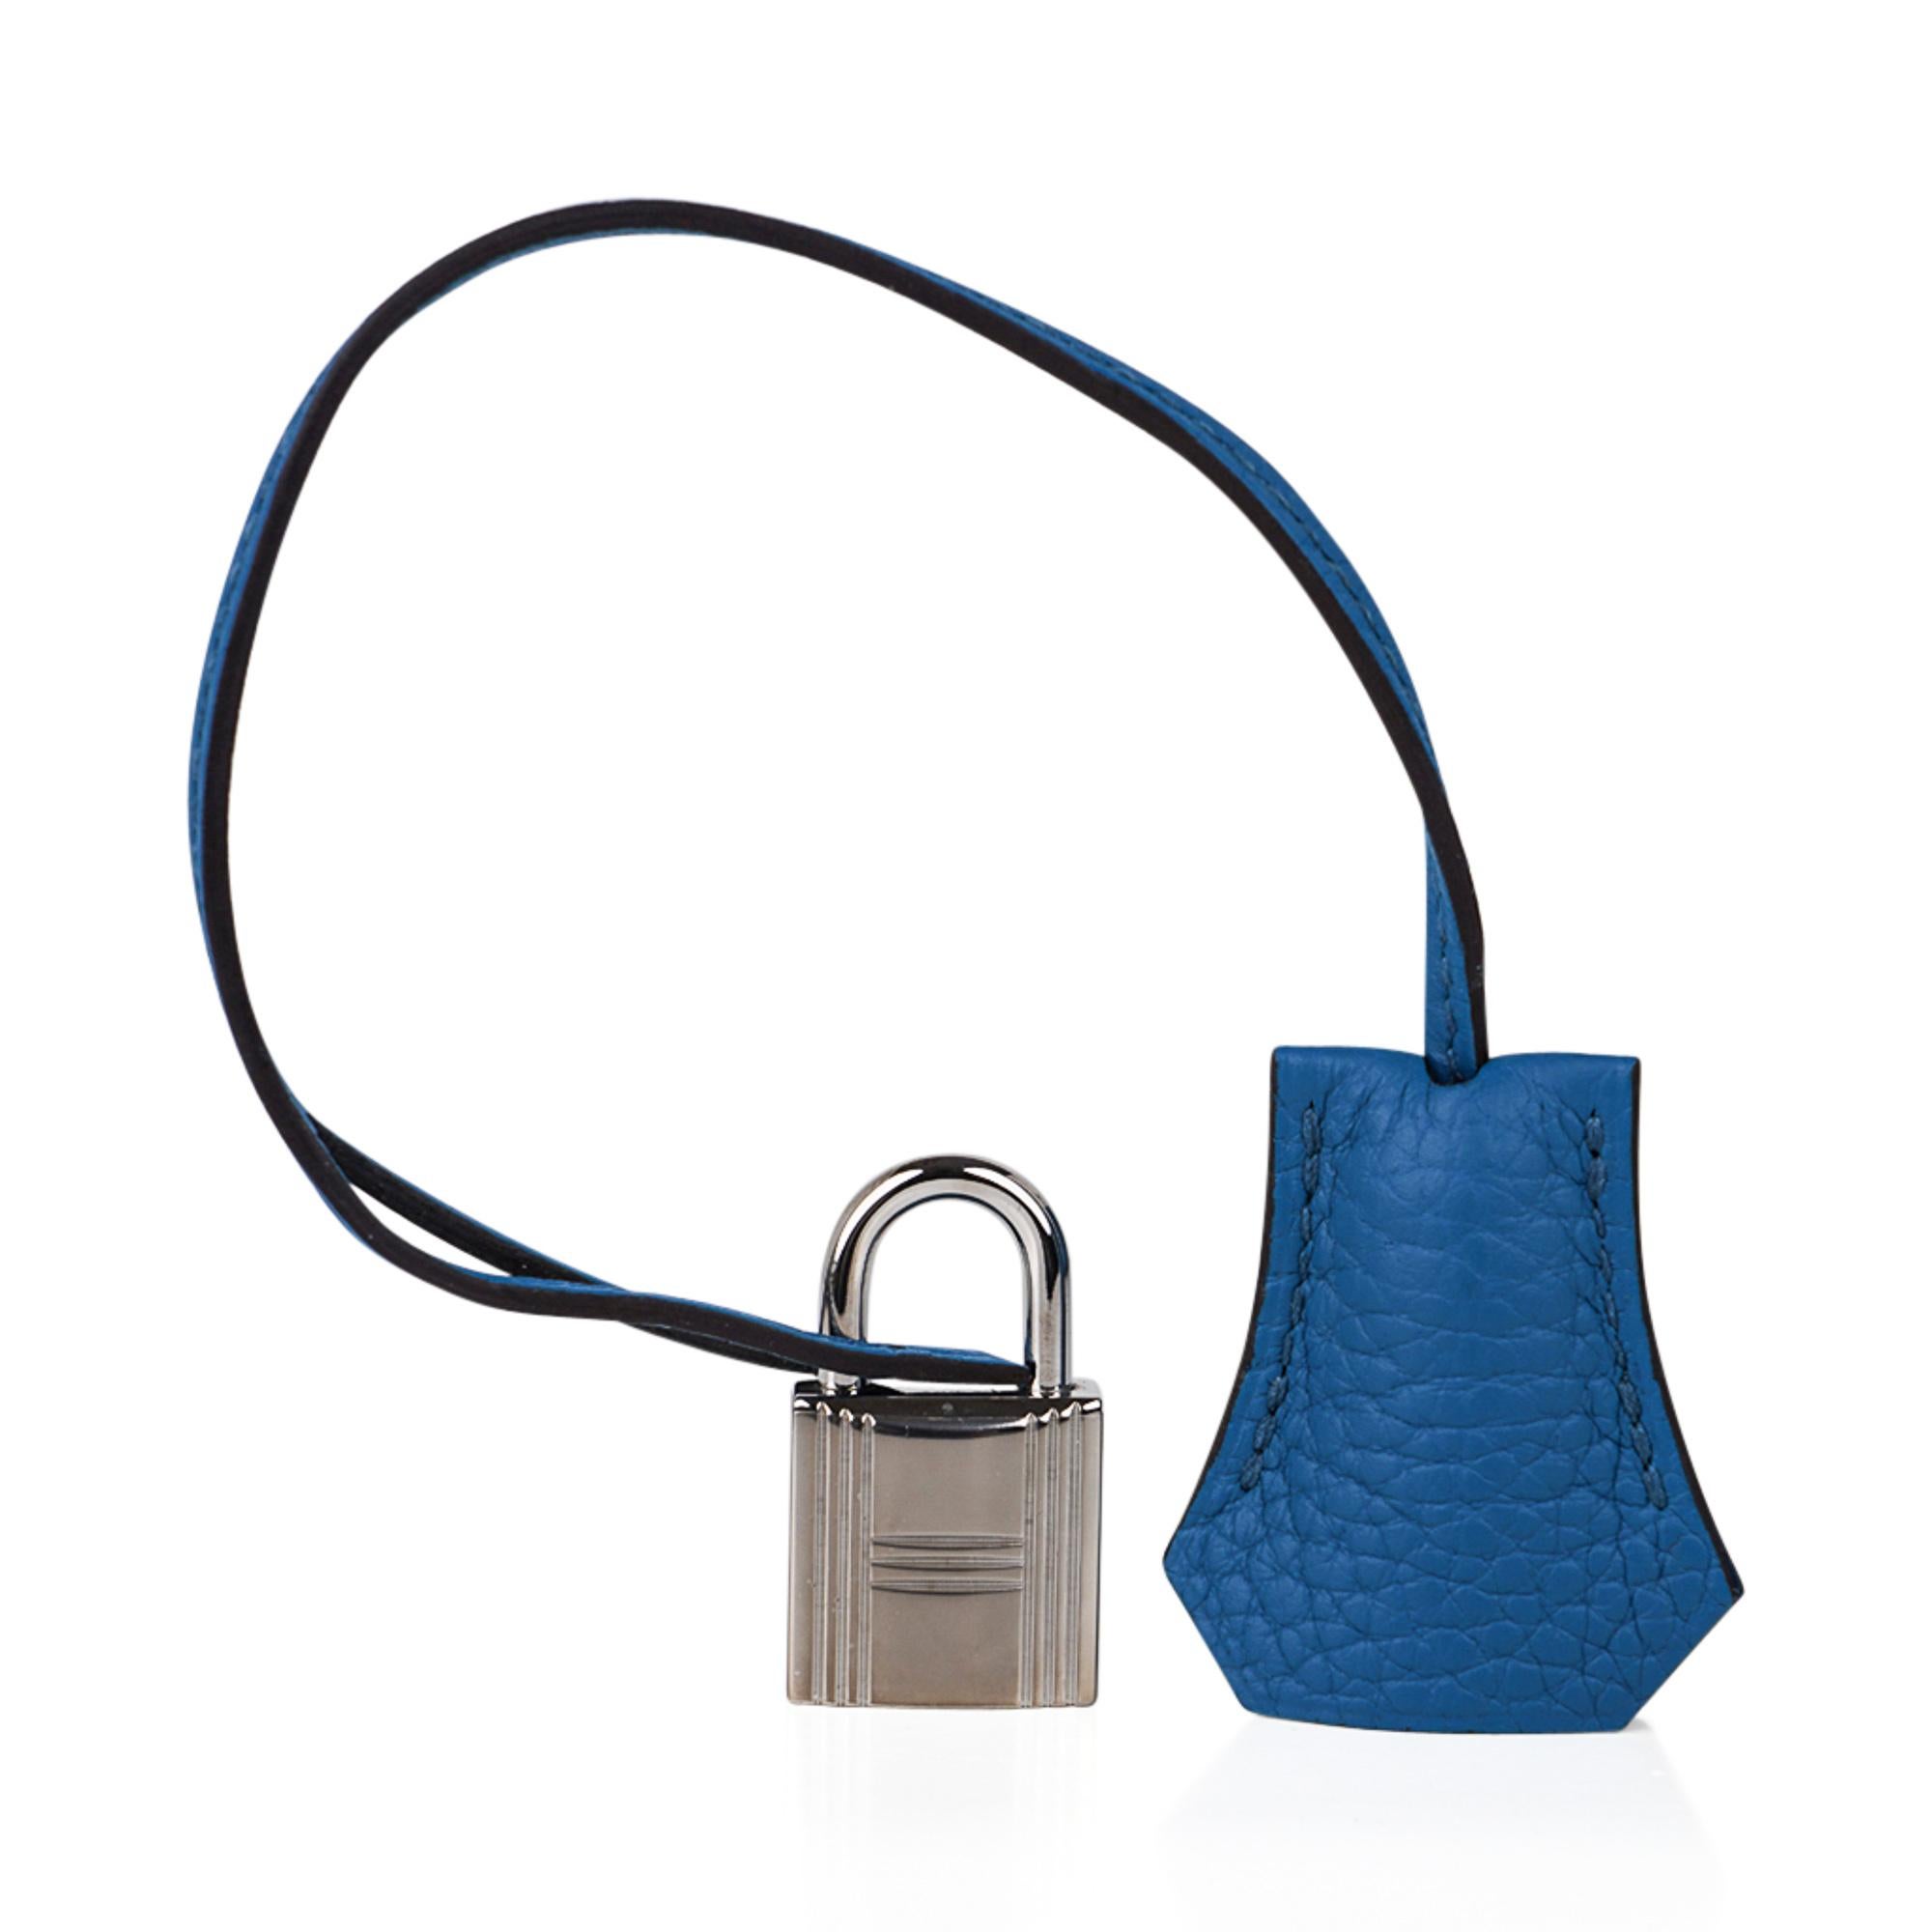 Guaranteed authentic Hermes 32 Kelly in vibrant Mediterranean Blue Izmir.
Lush Clemence leather is highly scratch resistant.
Fresh Palladium hardware.
Clean corners, body, handle and interior.  Minor marking on hardware..
Comes with strap, raincoat,